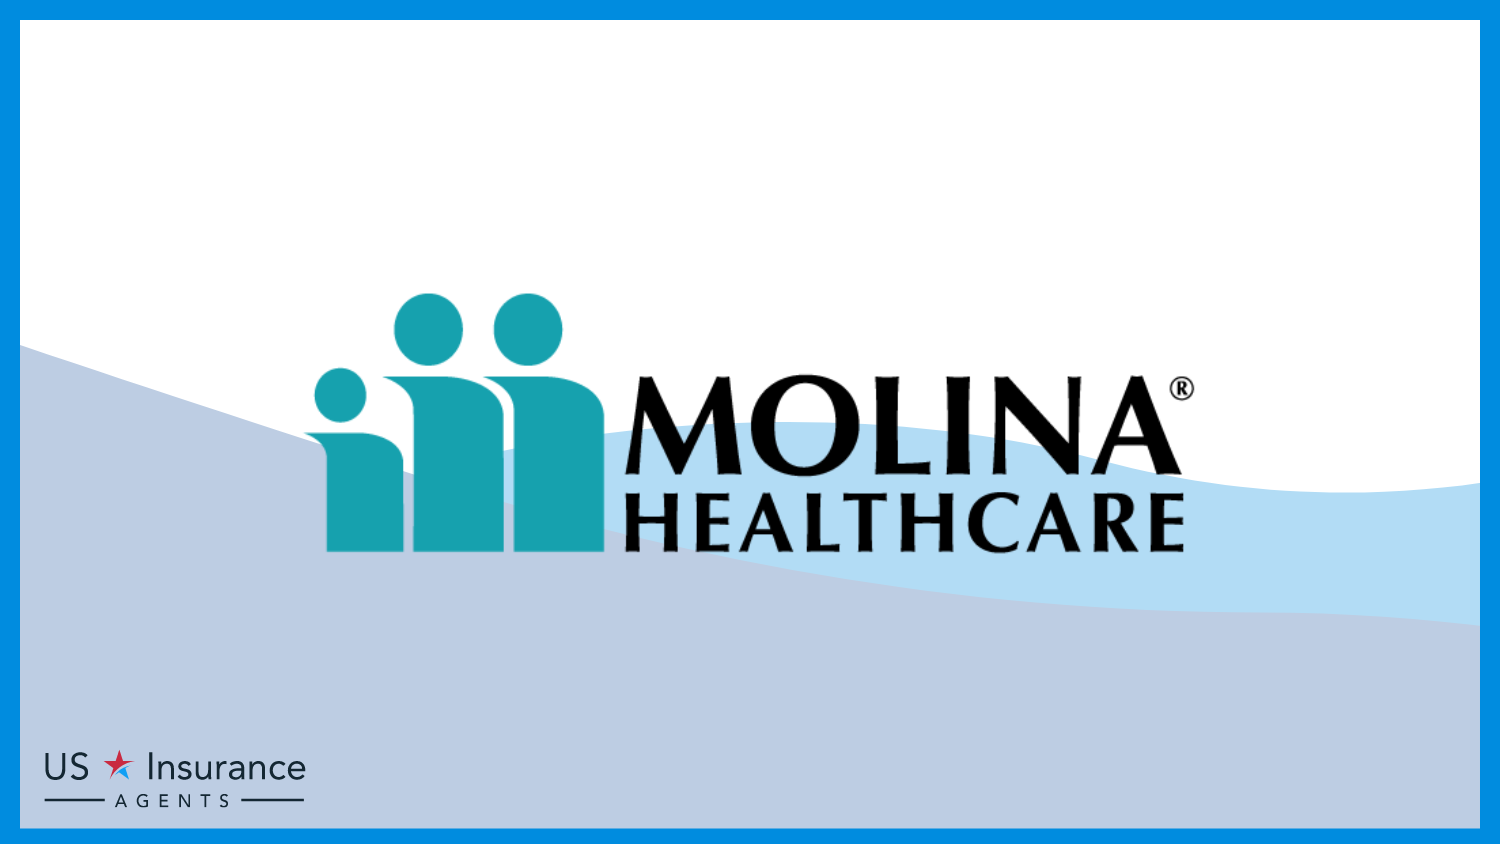 Molina Healthcare: Best Health Insurance For Neurologists